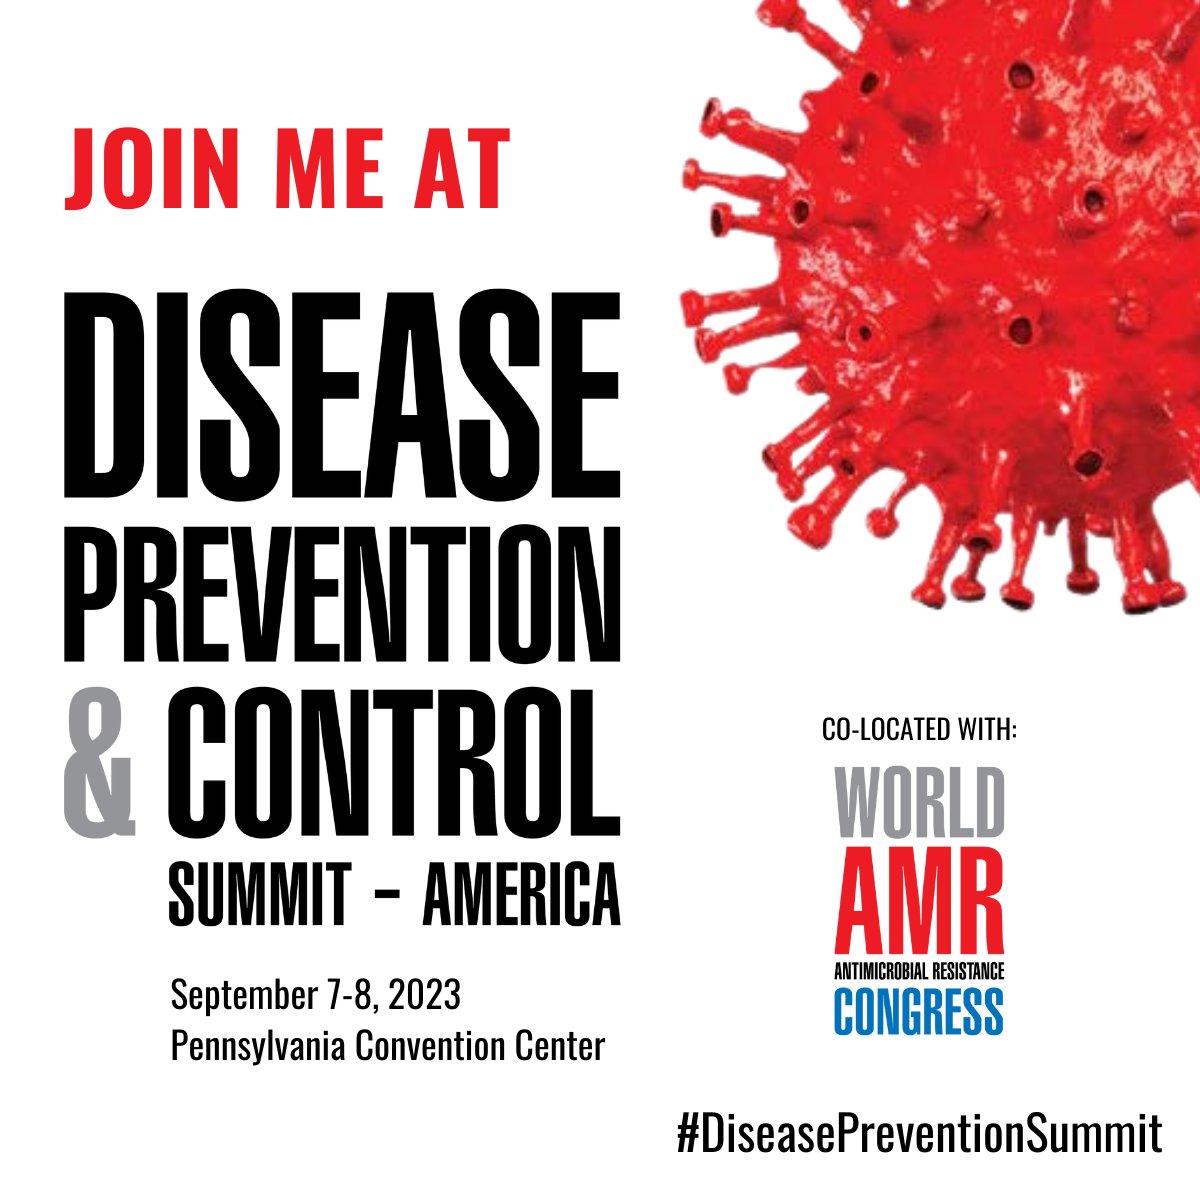 The #PandemicFund's @PriyaBasu2017 is speaking at the Disease Prevention and Control Summit 2023 Conference & Exhibition.

Next week!!
🗓️September 7-8, 2023
📍Pennsylvania Convention Center, Philadelphia

Register⤵️#WorldAMRCongress @AMRCongress
terrapinn.com/template/live/…